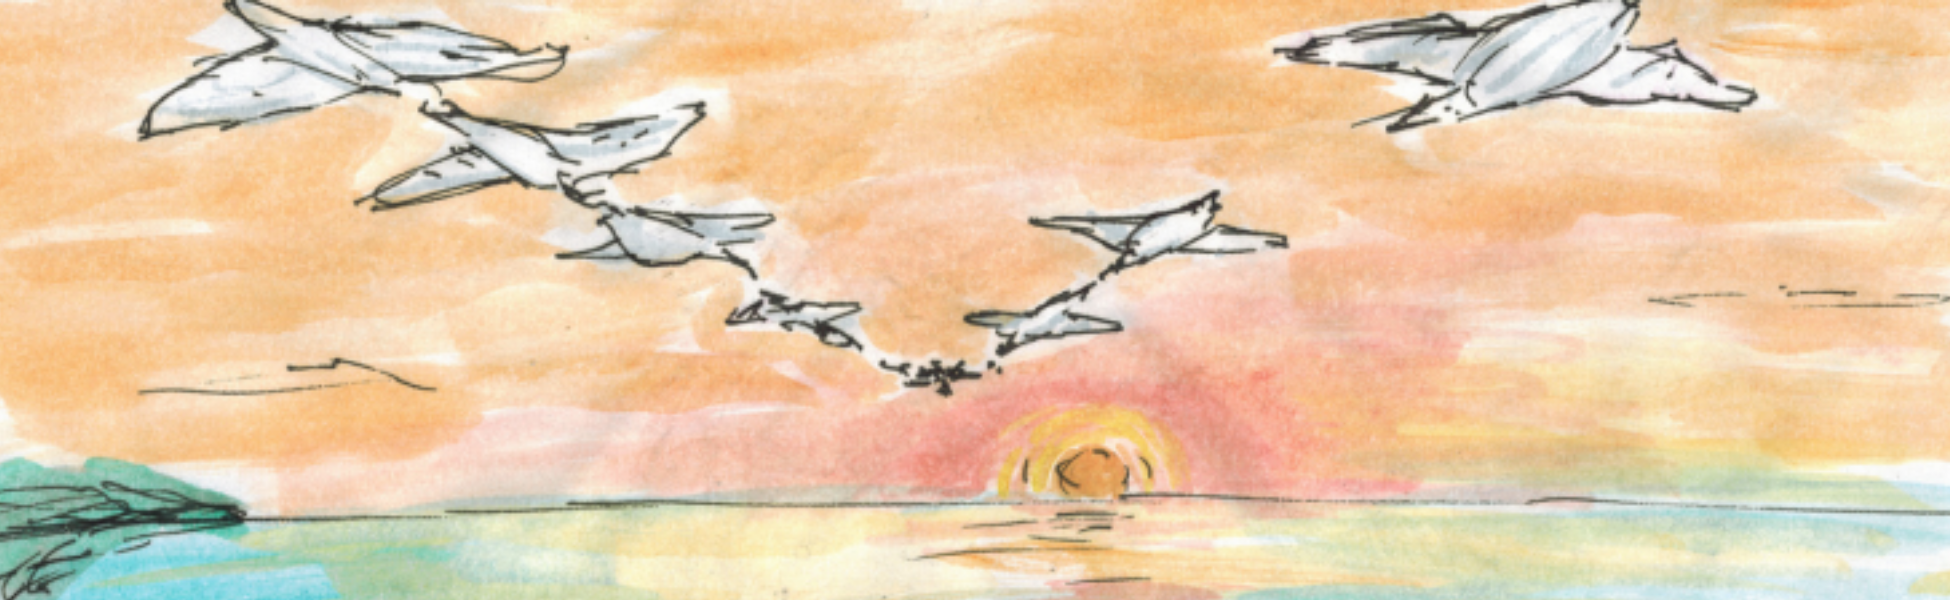 Painting of a flock of geese flying into the sunset over the beach.